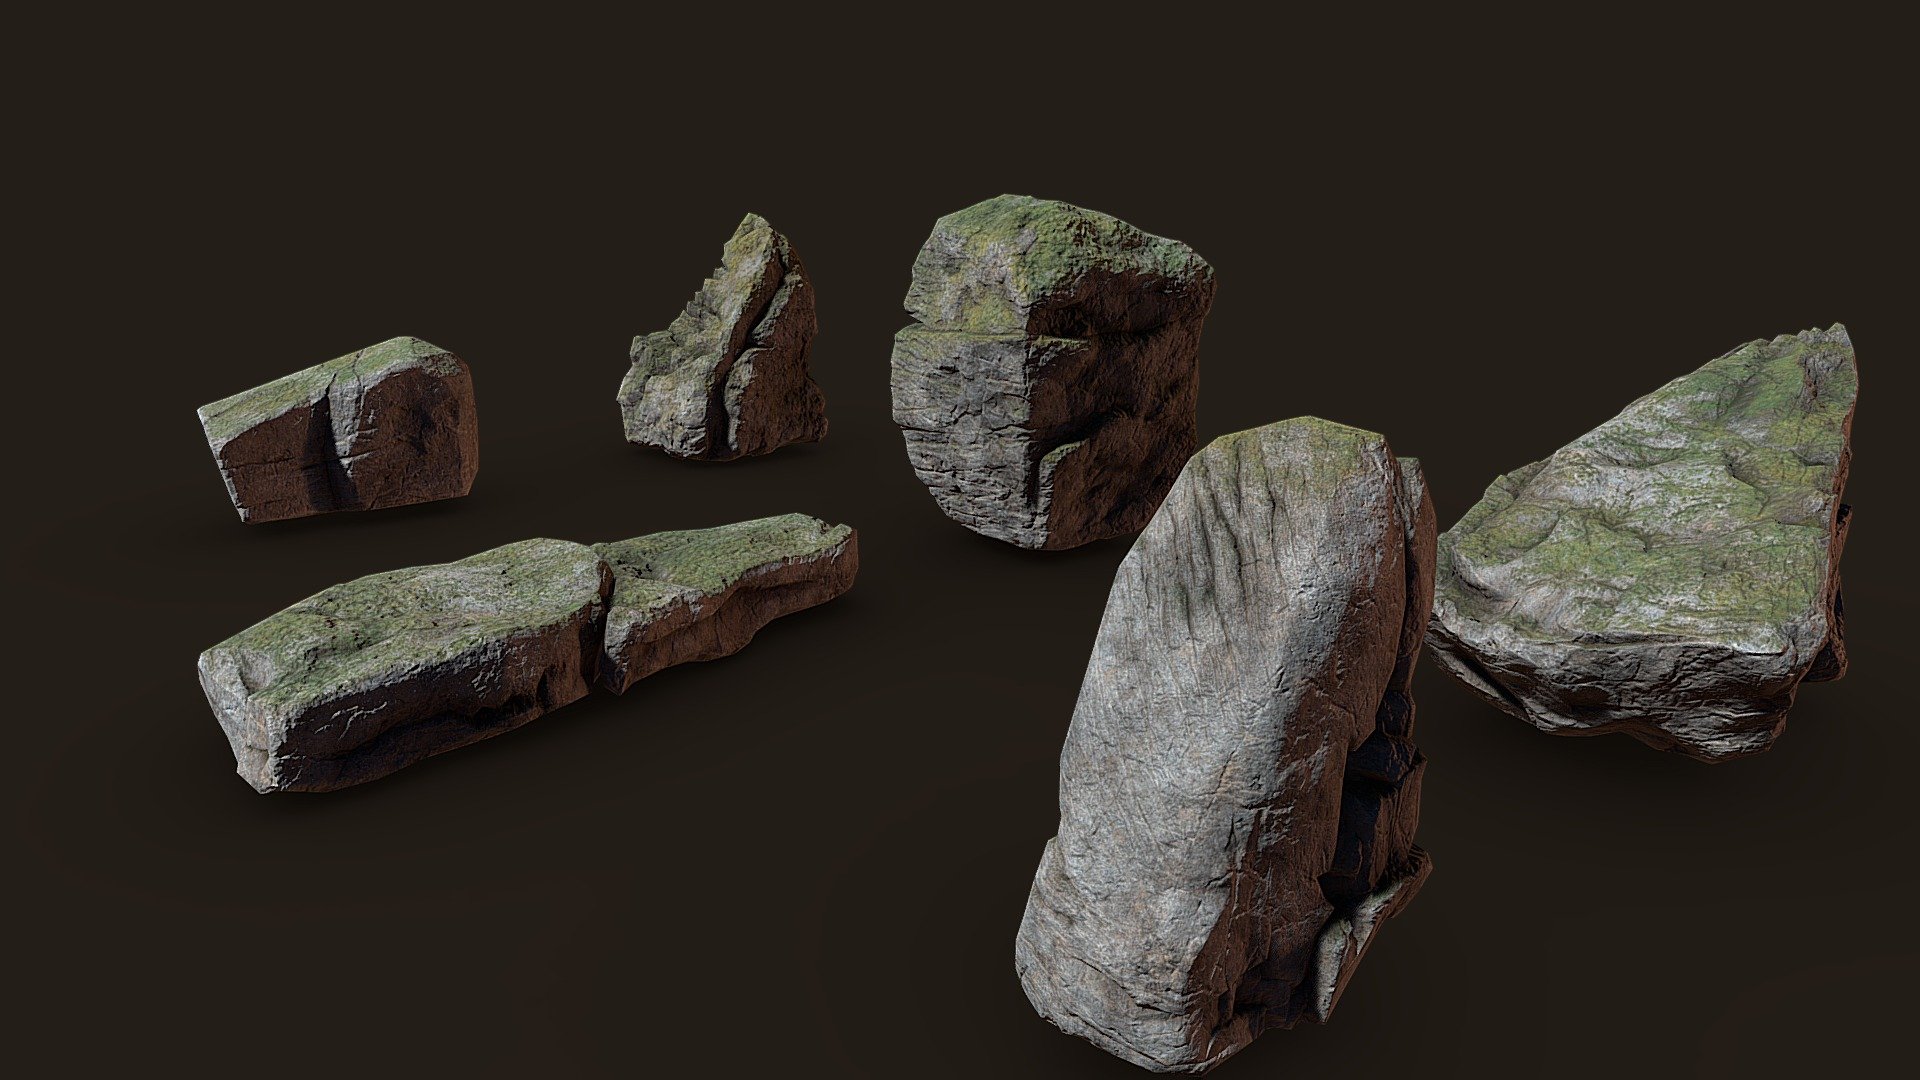 Realistic Rocks - LowPoly
Centered at origin in real world scale. Clean UVs, fully unwrapped, No overlaps. Materials and textures 4096 Pixel.

Content:
- 4K textures with and without moss
- SM_LittleRock_01 
- SM_LittleRock_02
- SM_LittleRock_03
- SM_LittleRock_04
- SM_LittleRock_05
- SM_LittleRock_06

Enjoy the models, and leave a feedback, please 3d model